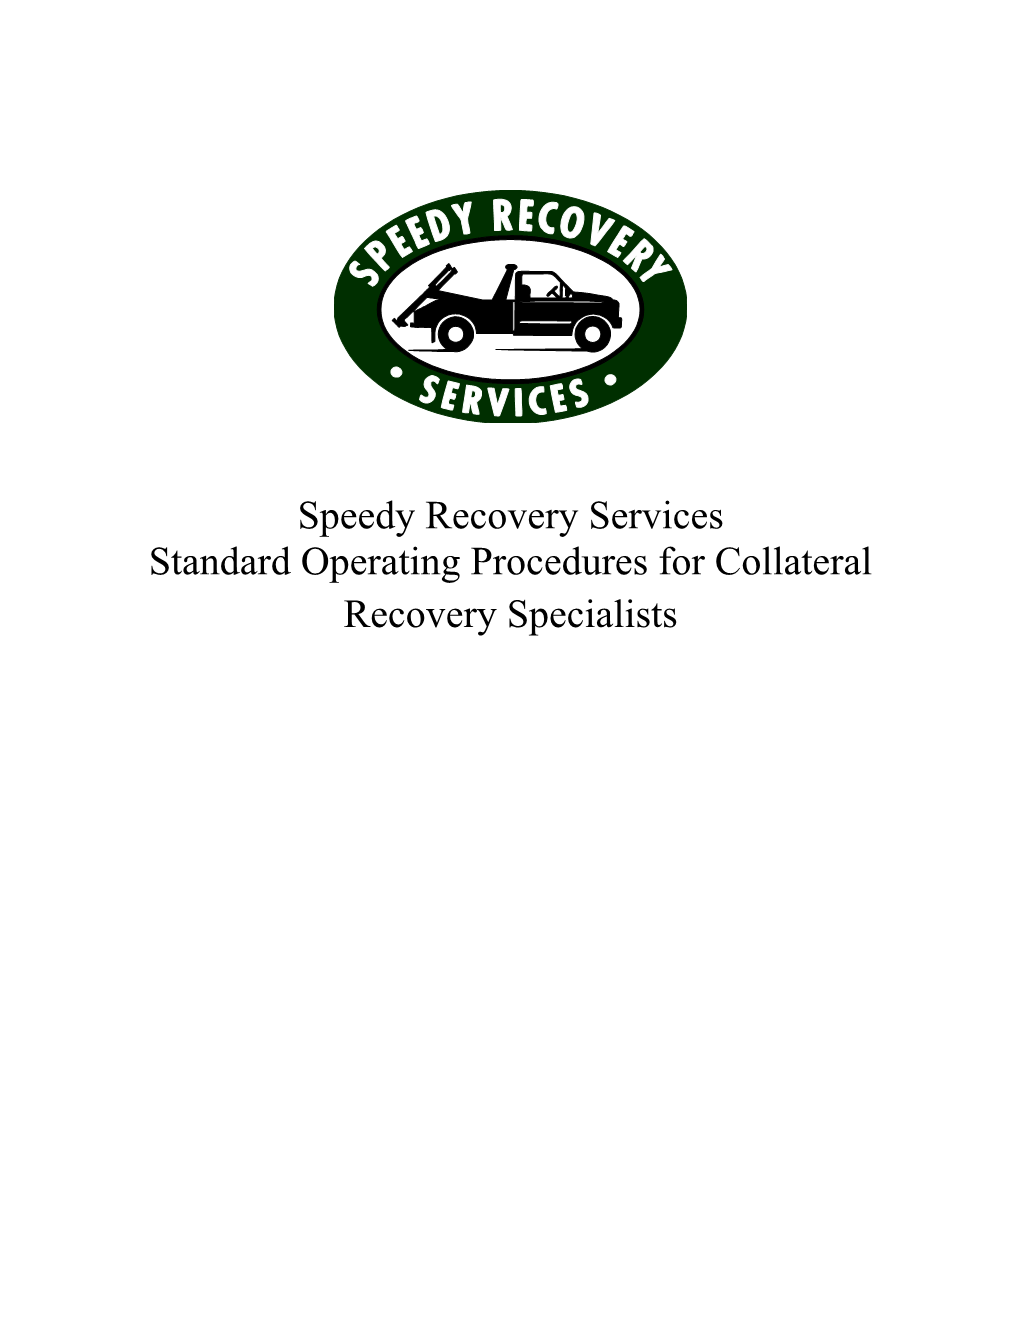 Standard Operating Procedures for Collateral Recovery Specialists